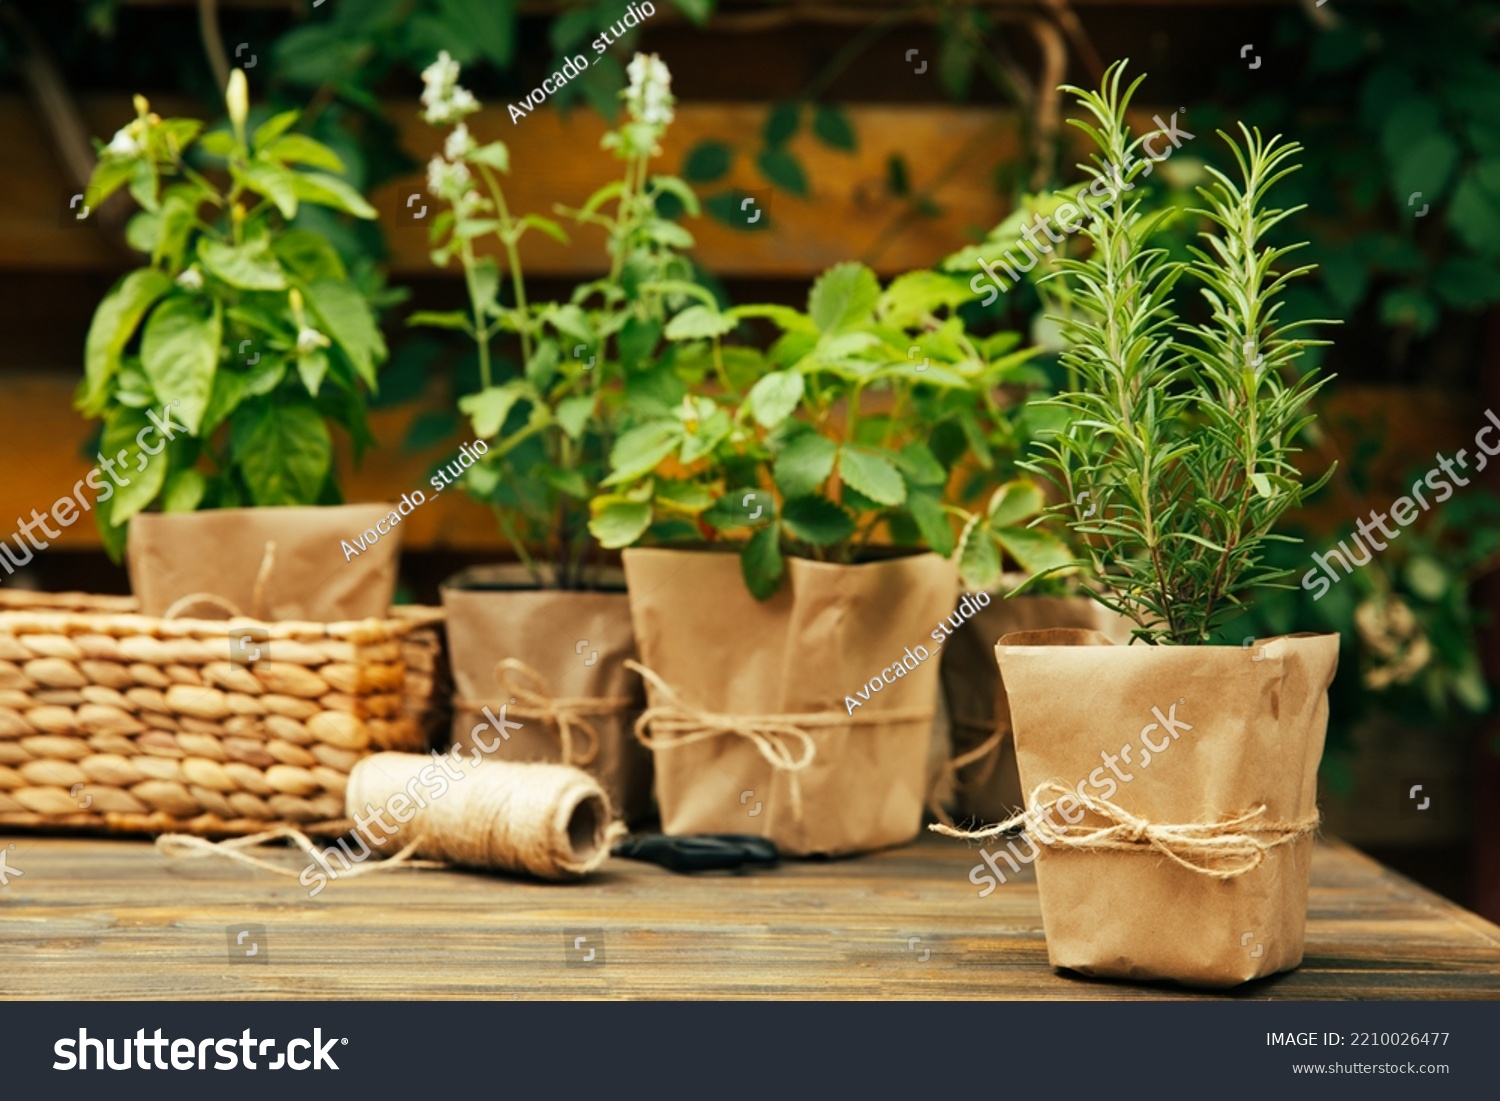 Potted fresh garden herbs.Rosemary, mint, pepper and strawberry in brown paper package.Spicy spice and herb seedling.Assorted fresh herbs in a pot.Home aromatic and culinary herbs.Copy space. #2210026477